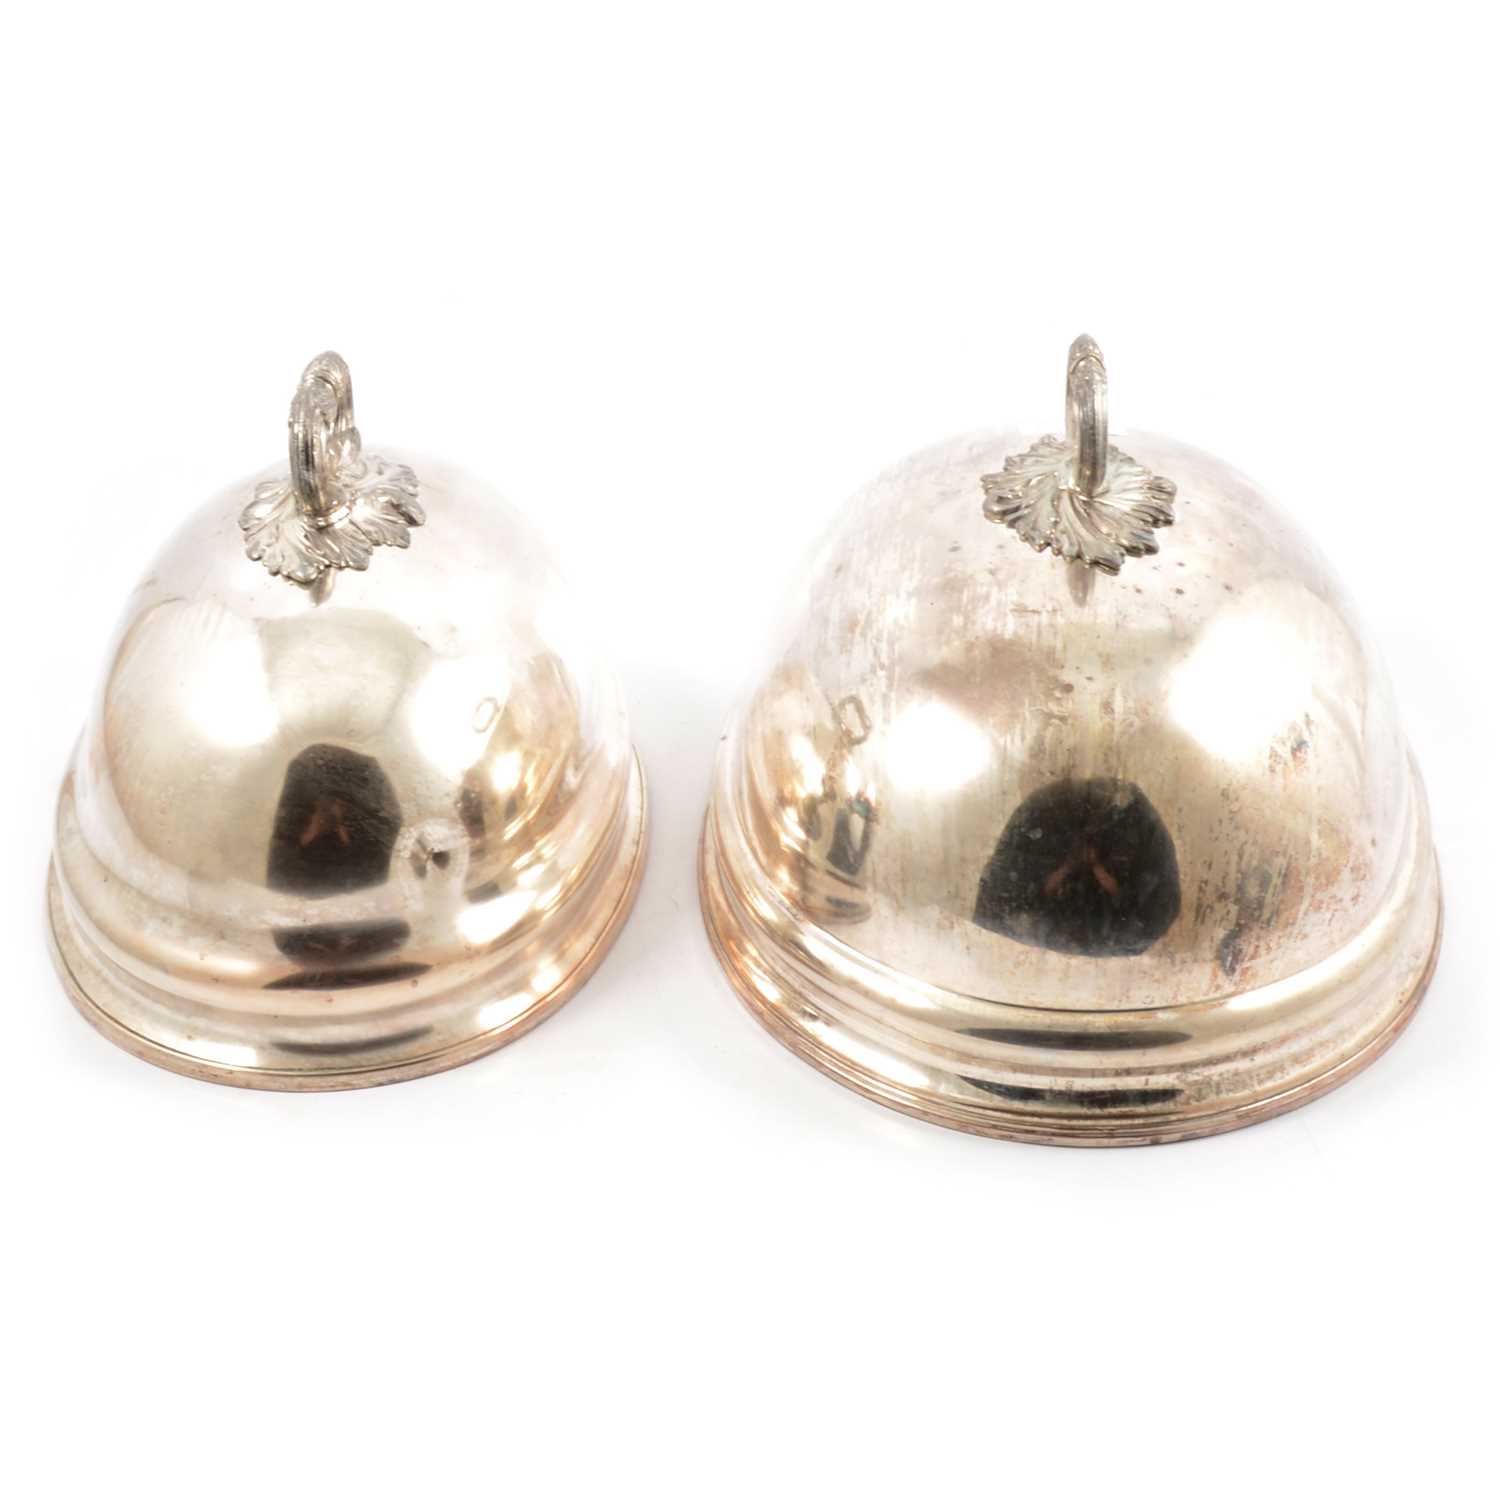 Lot 89 - A pair of matching silver-plated meat covers, one slightly larger than other.